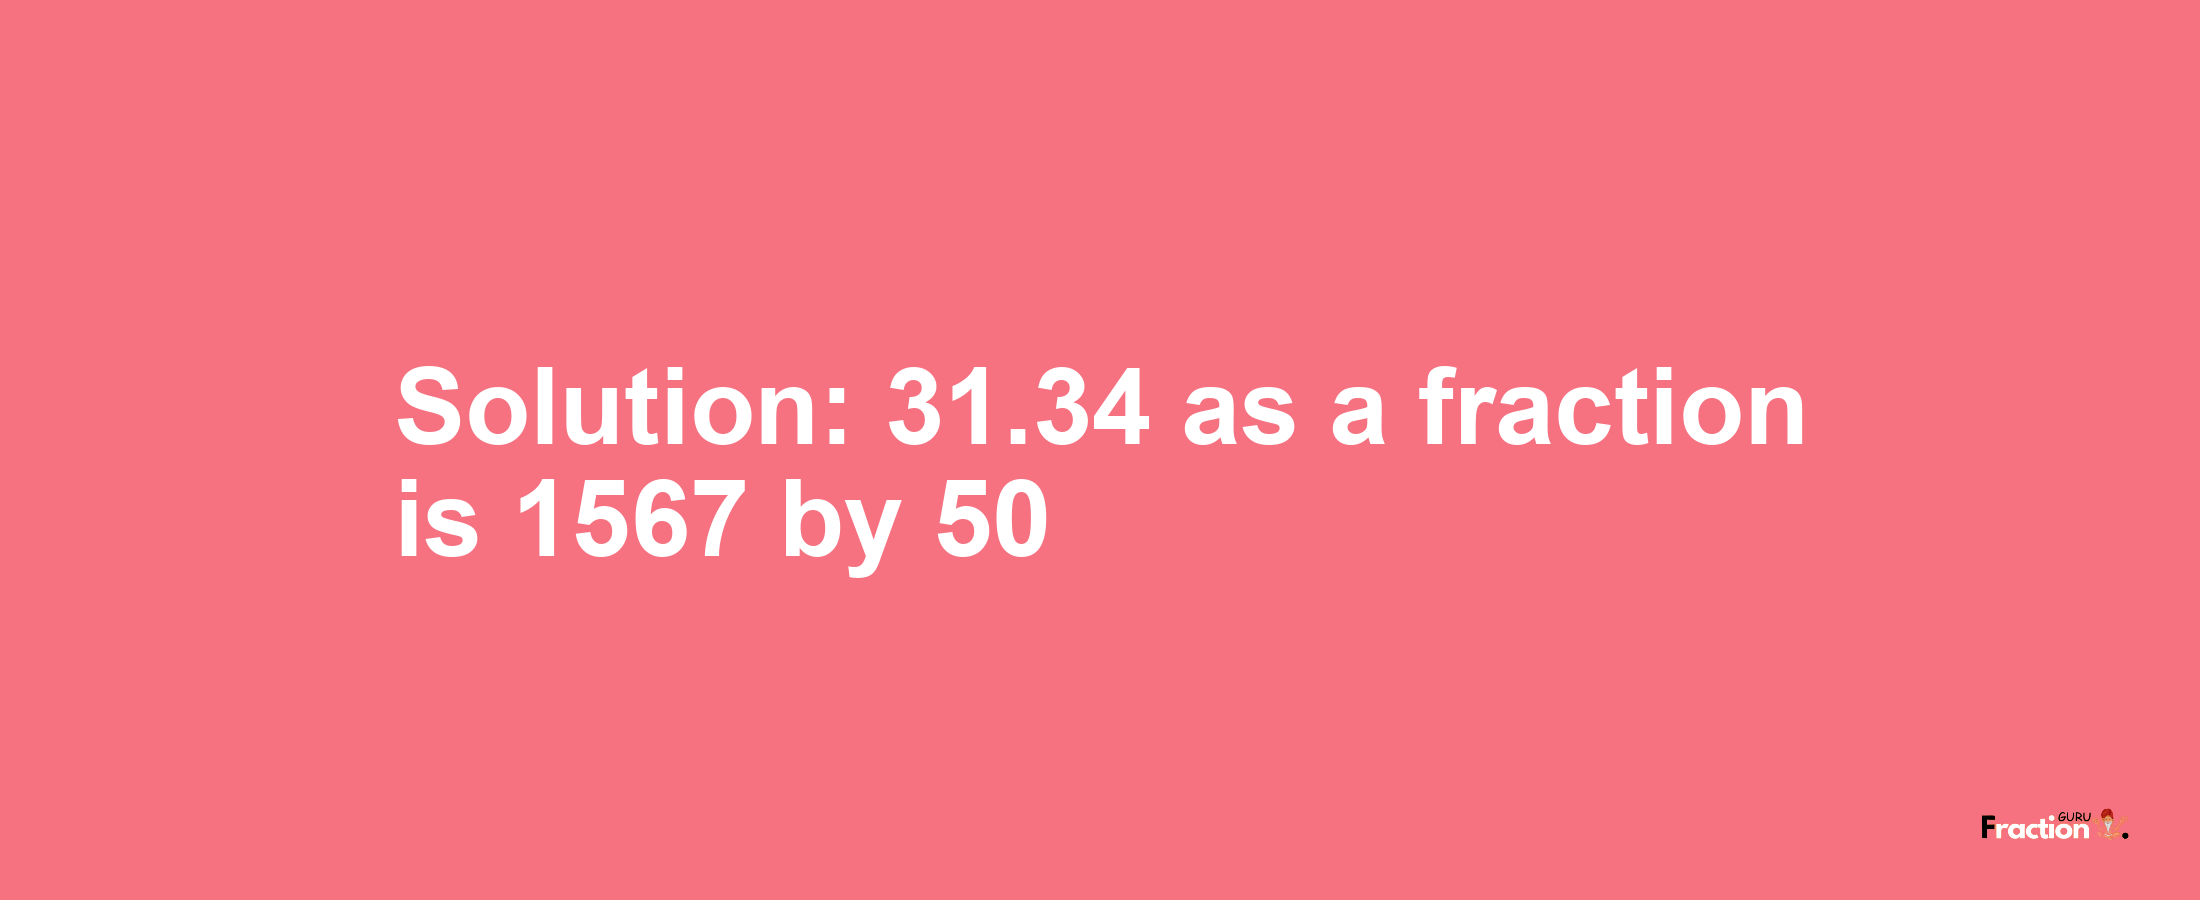 Solution:31.34 as a fraction is 1567/50